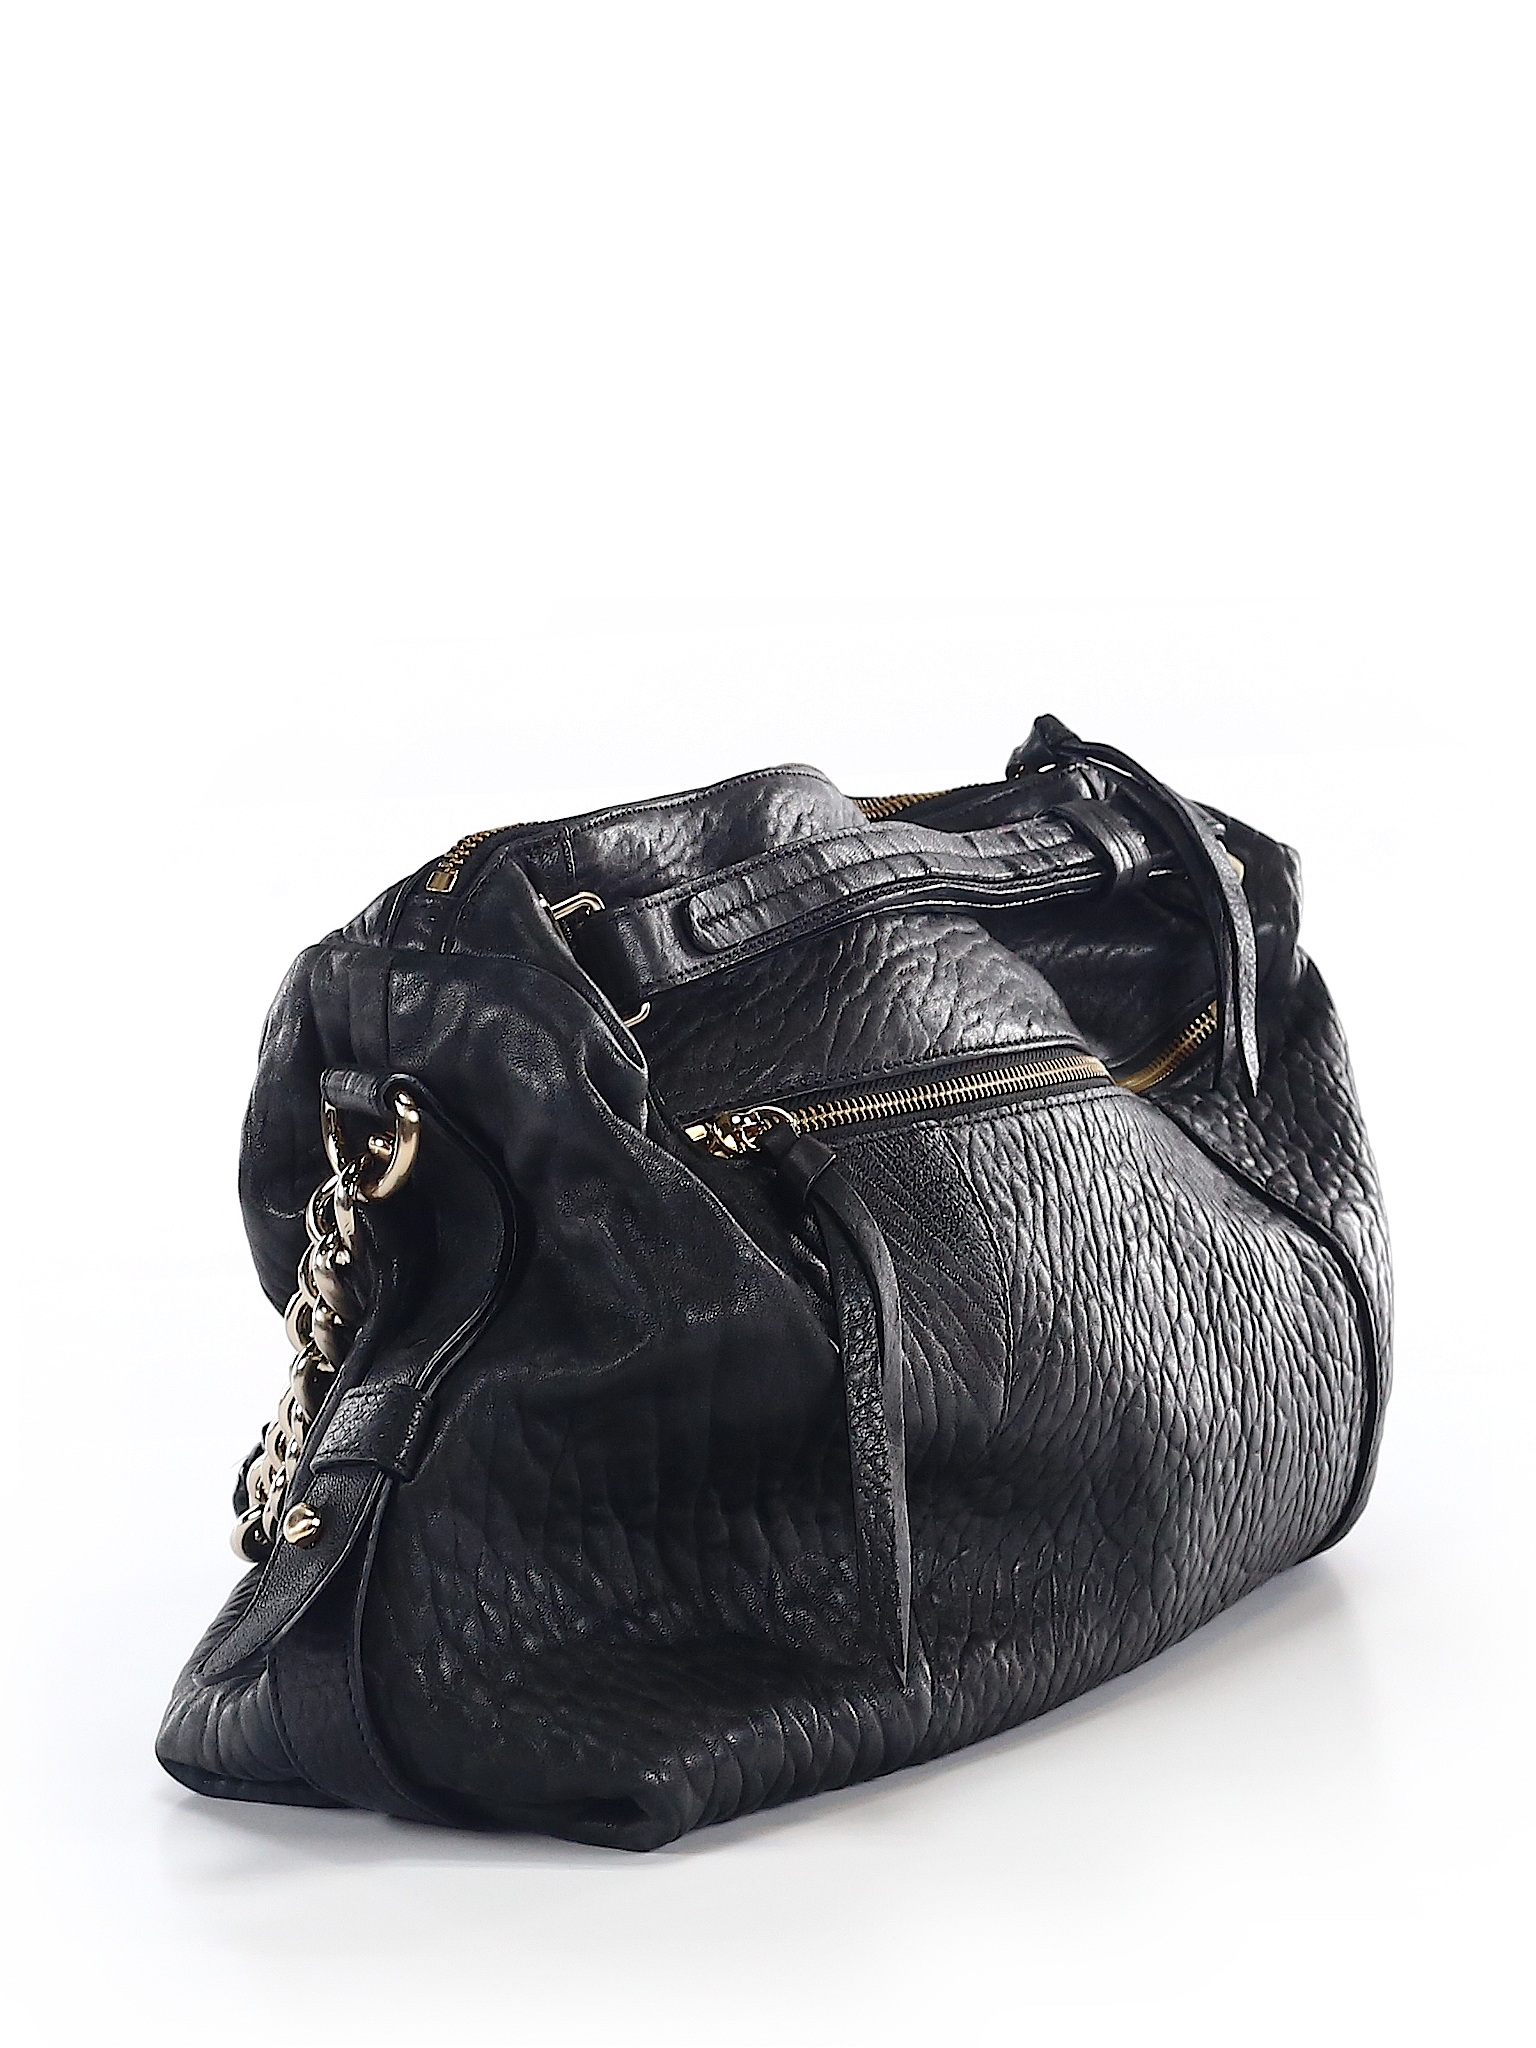 MS by Martine Sitbon 100% Leather Solid Black Leather Hobo One Size - 71%  off